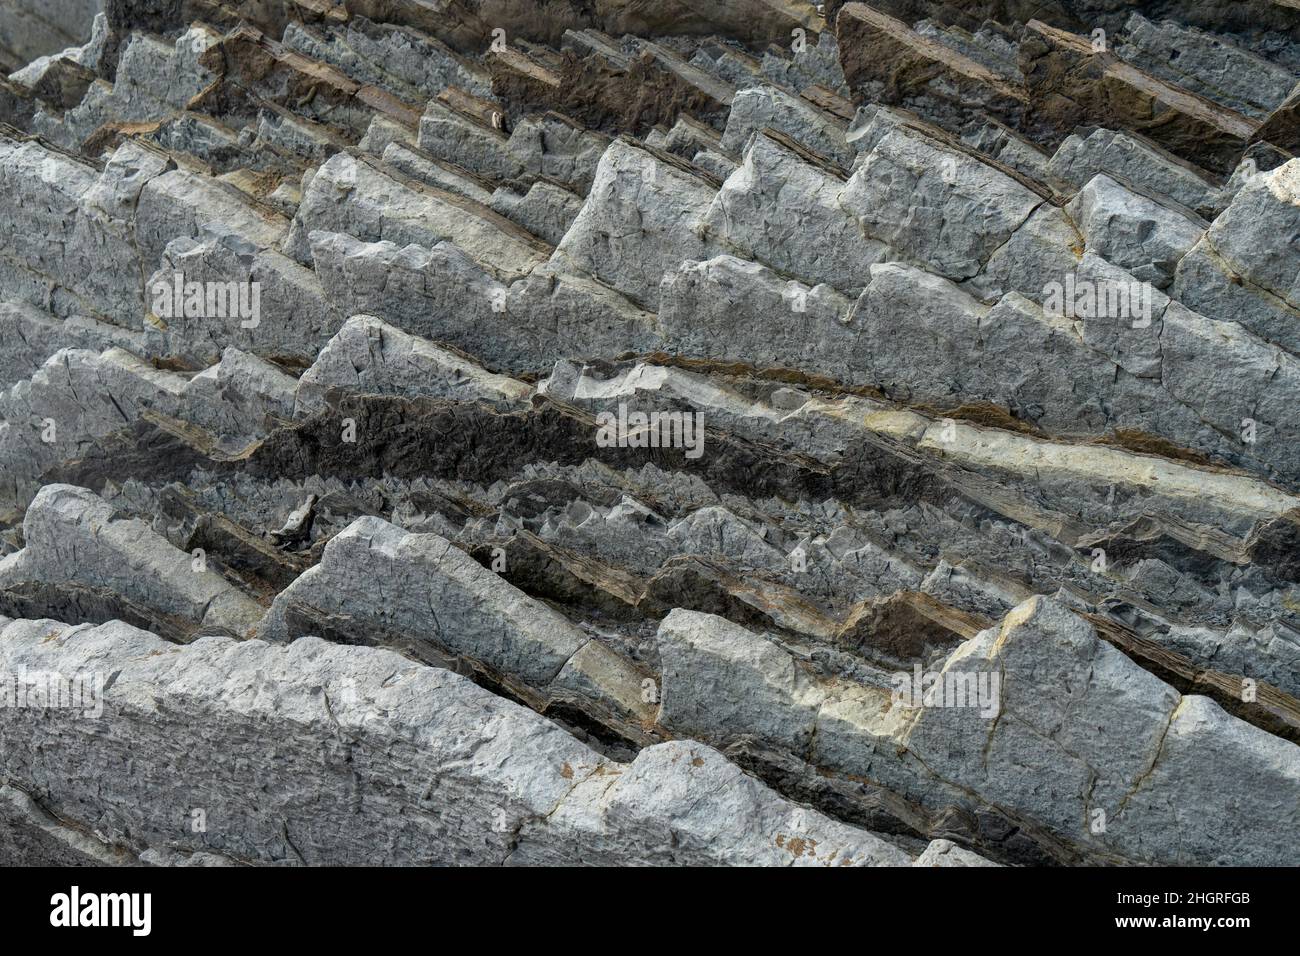 Layers of stone stacked on top of each other Stock Photo